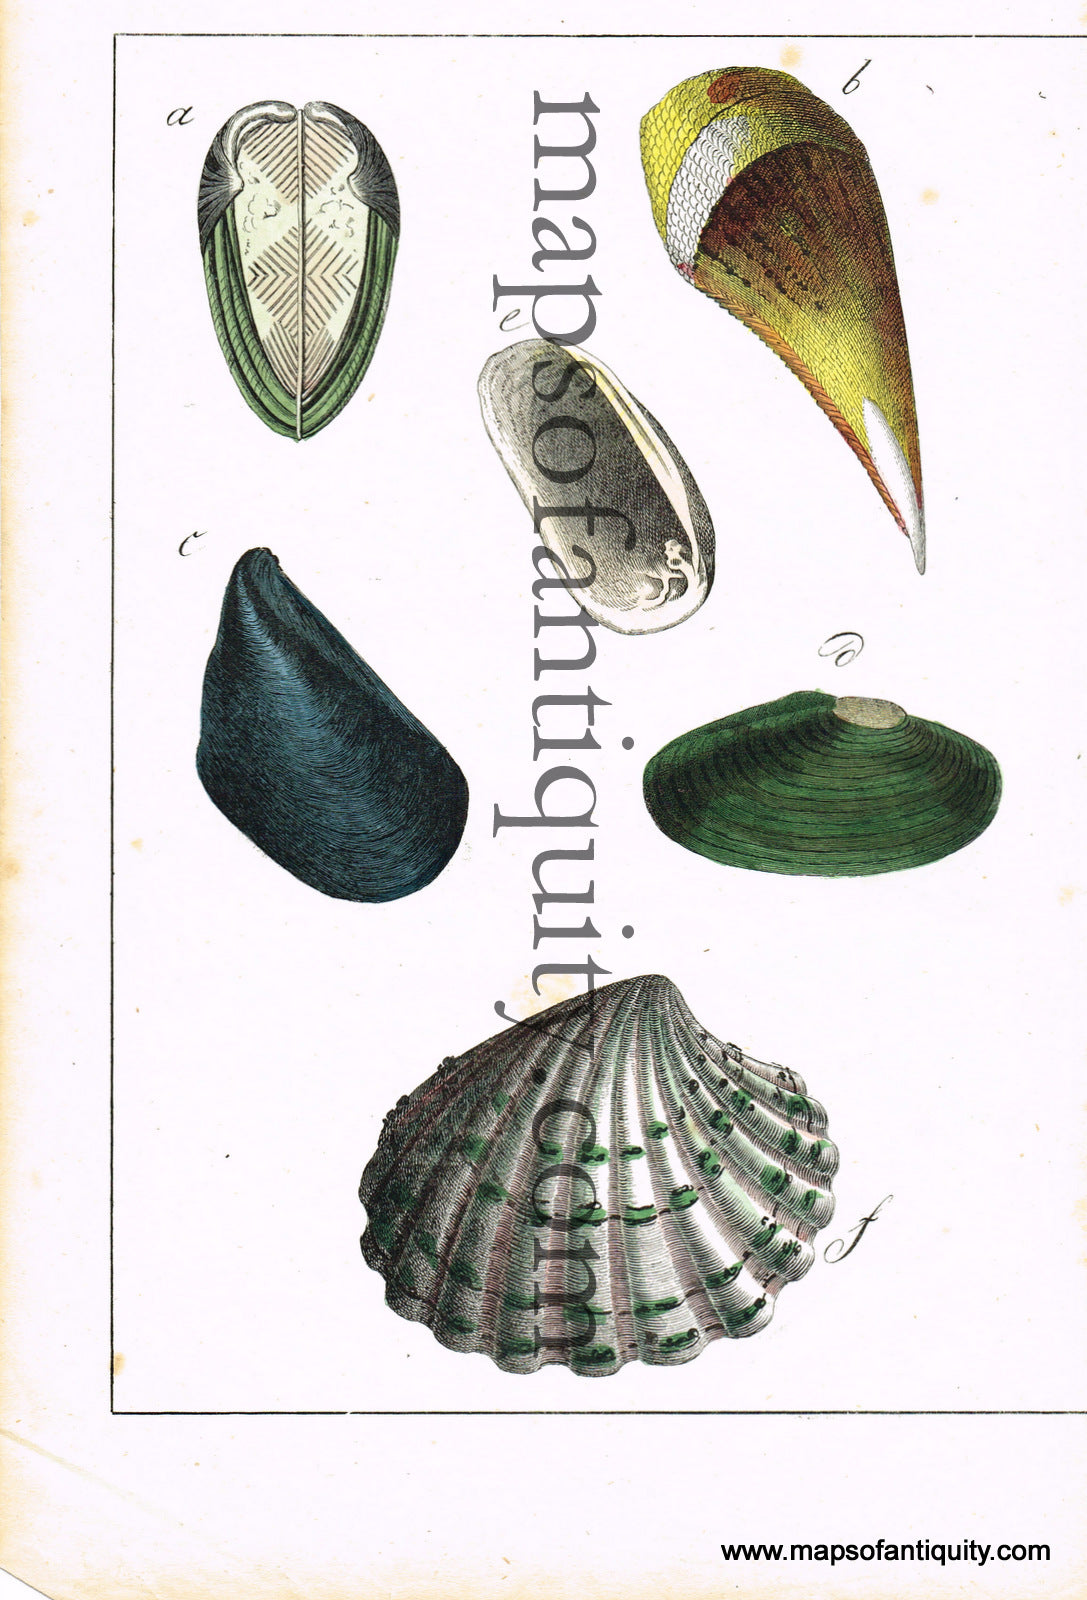 Antique-Hand-Colored-Engraved-Illustration-Sea-Shells-Natural-History-Prints-Sea-Shells-c.-1800--Maps-Of-Antiquity